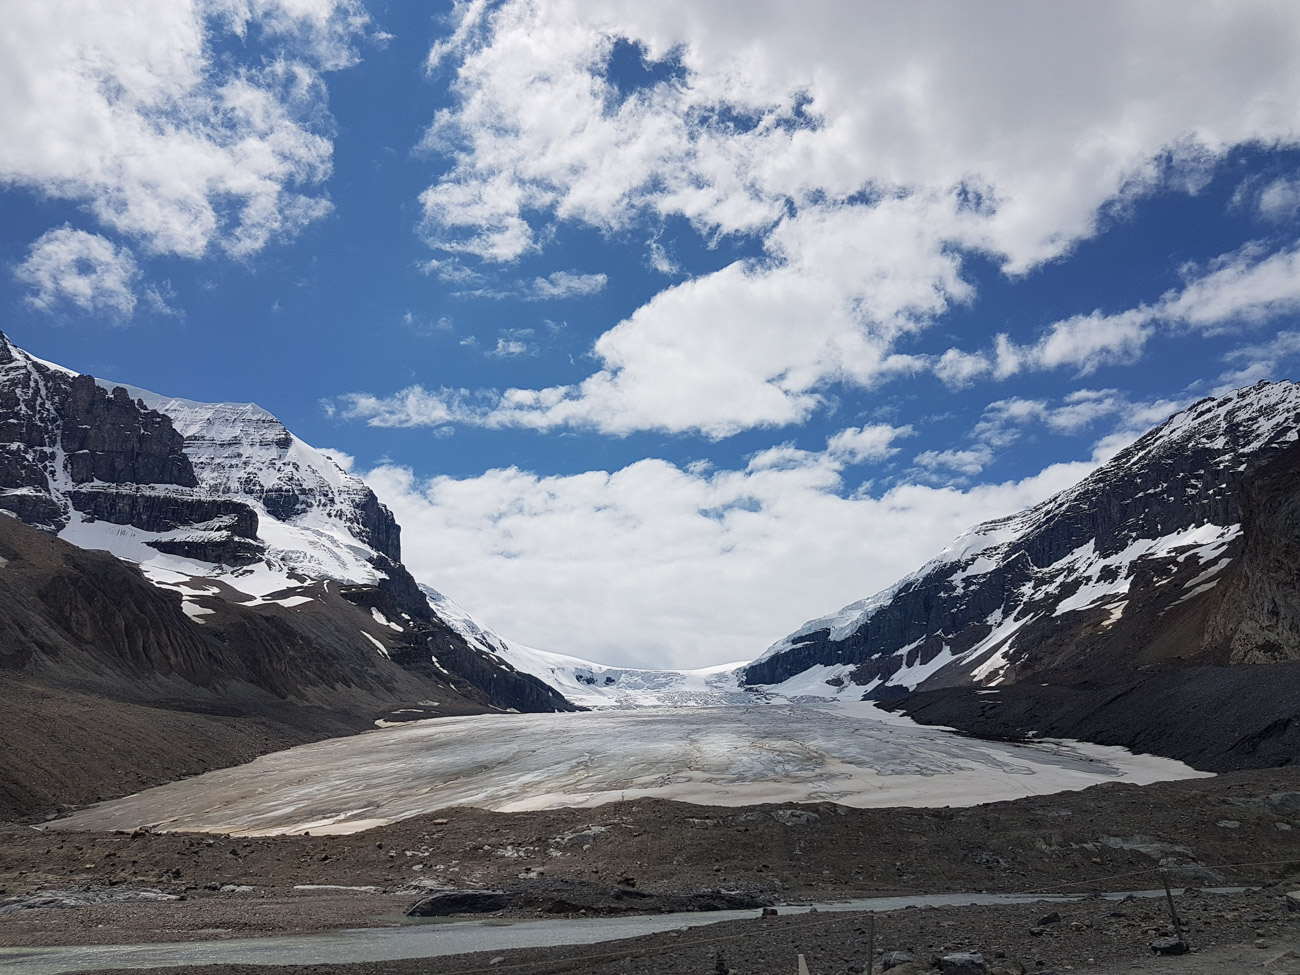 The Athabasca Glacier used to be here in 2000, where this photo was taken.